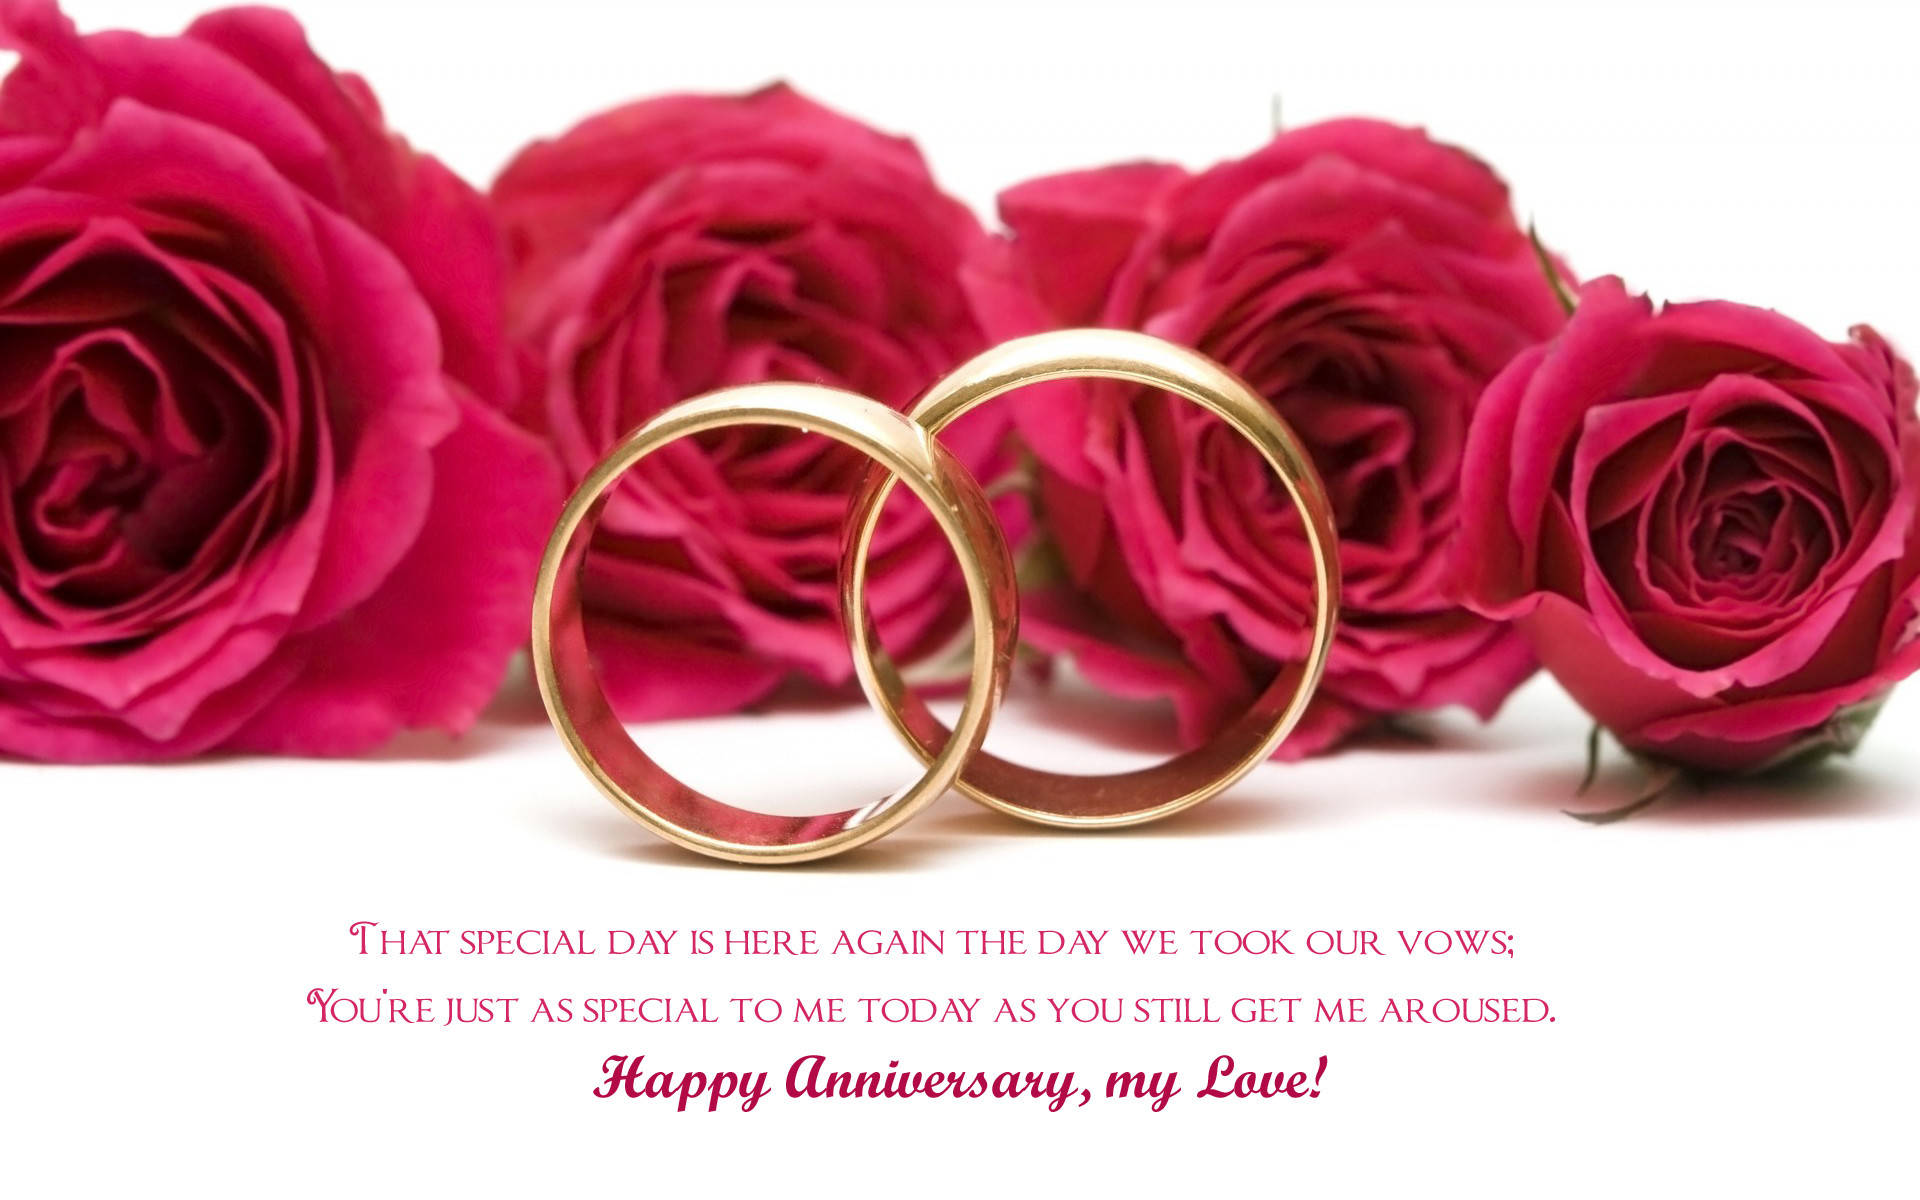 Happy Anniversary Gold Rings And Roses Background